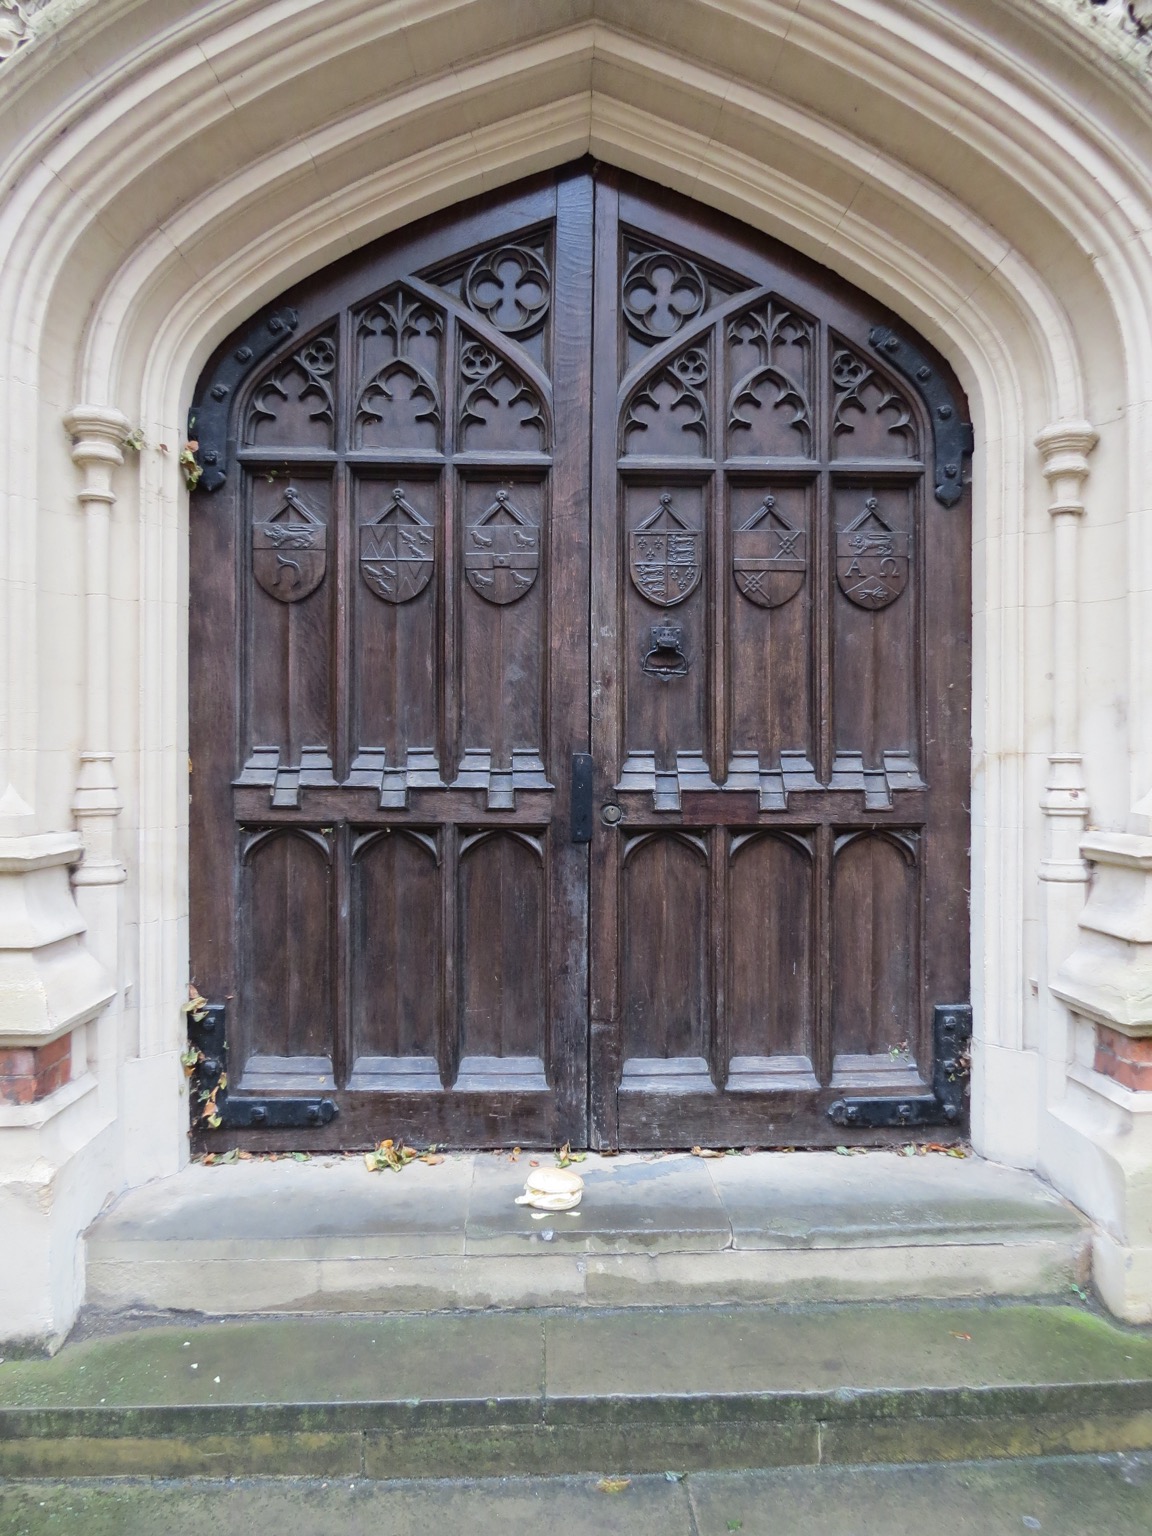 Roll containing crisps in front of large, ornate door